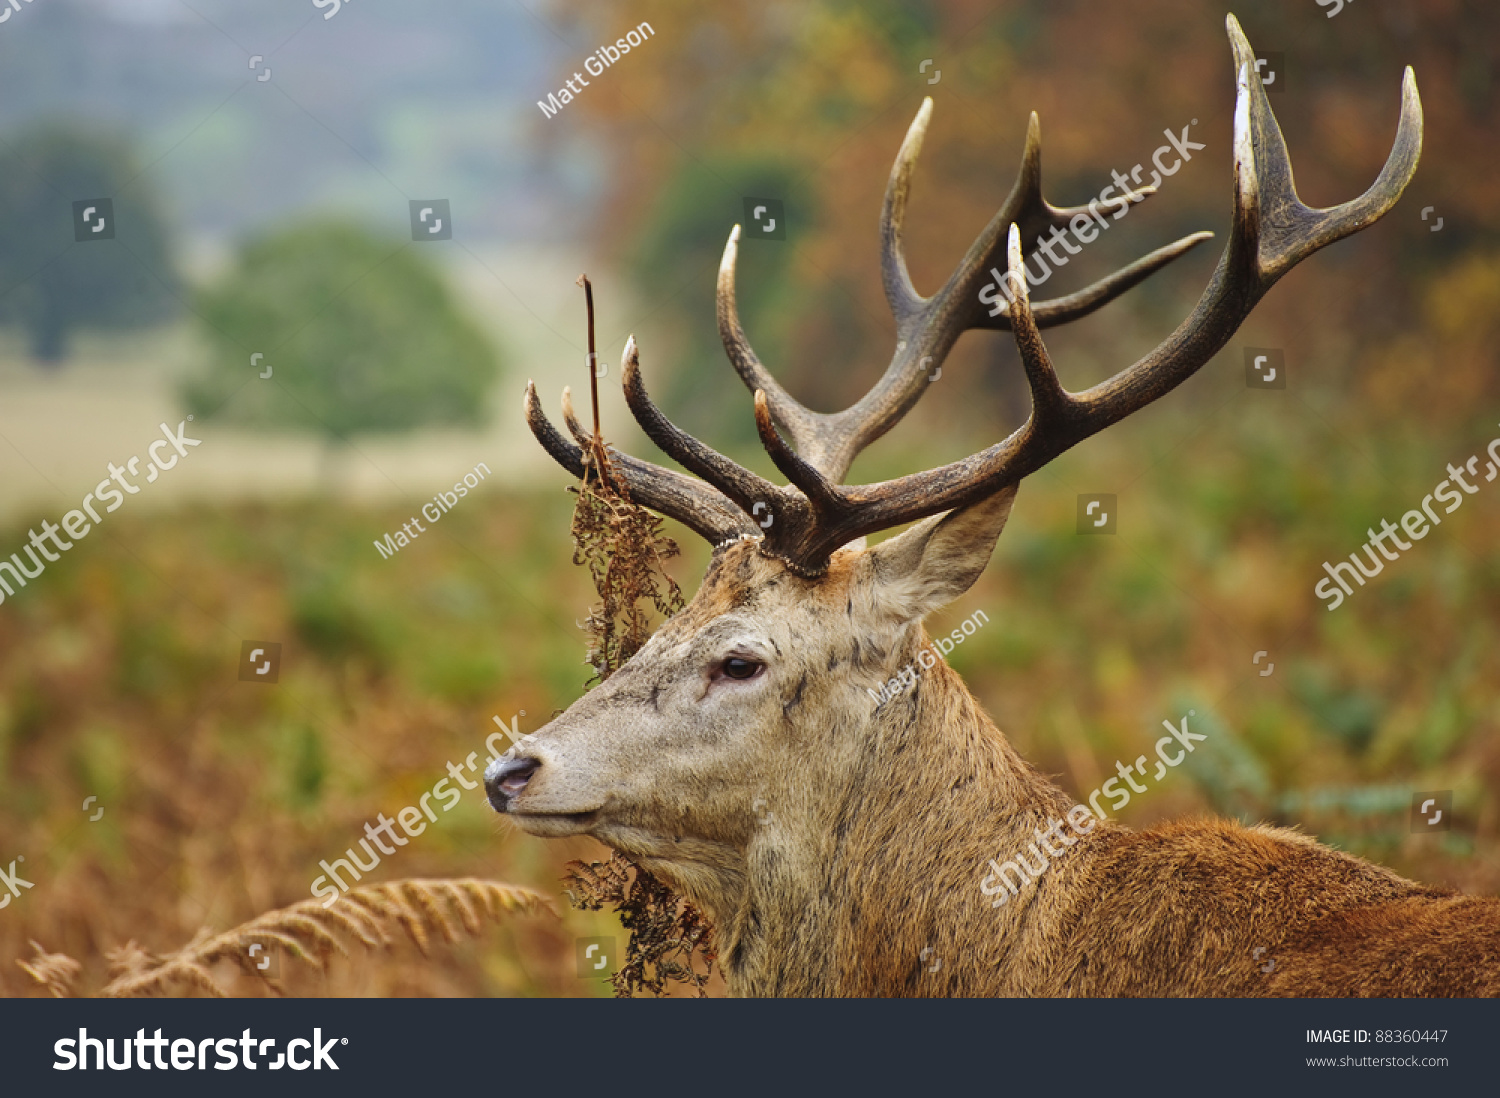 Portrait of majestic powerful adult red deer stag in Autumn Fall forest #88360447